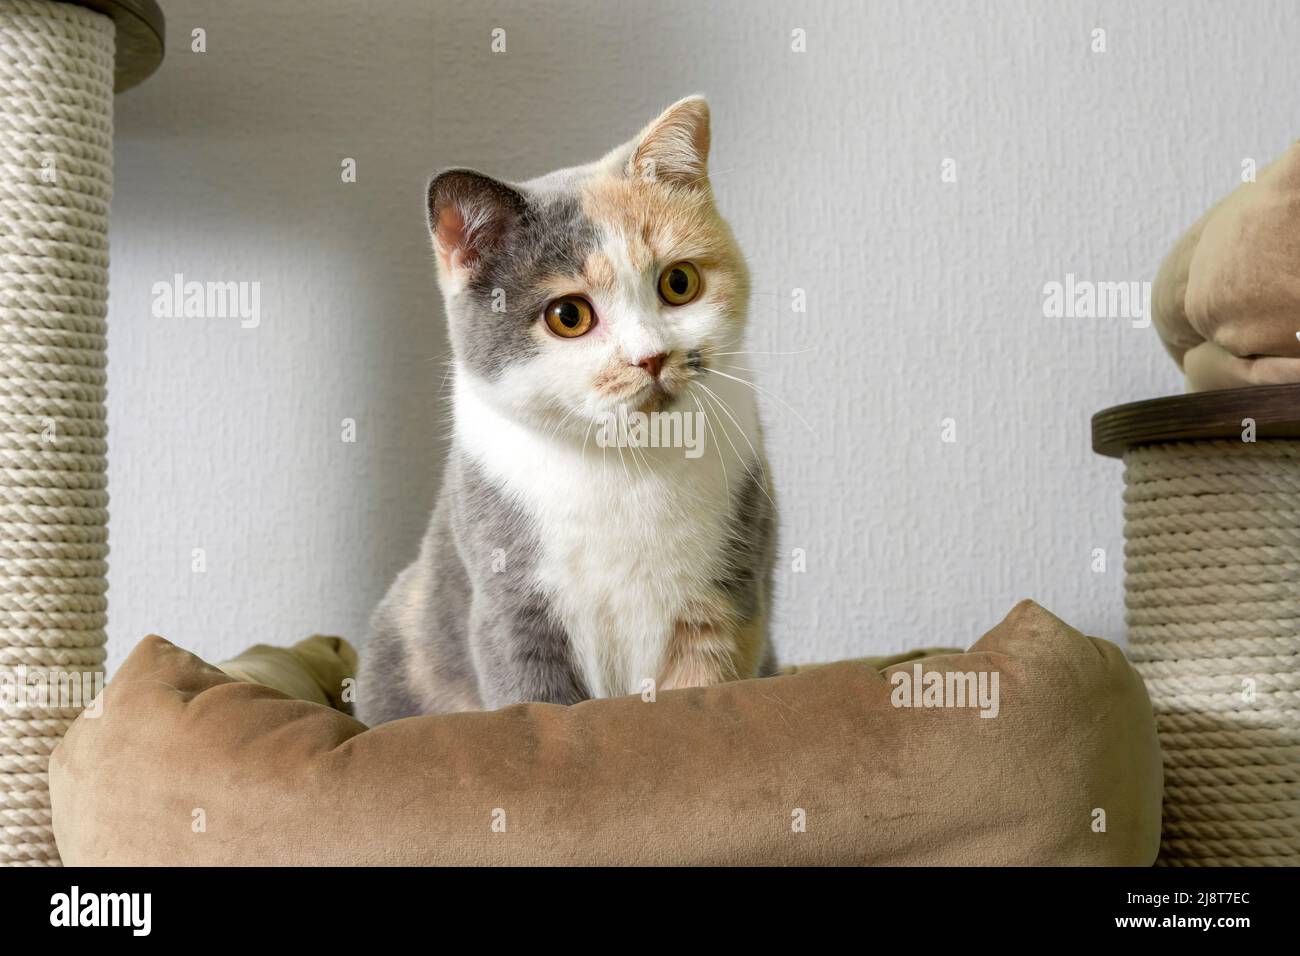 Cute pet cat of the British shorthair breed is playing on a cat tree at home Stock Photo